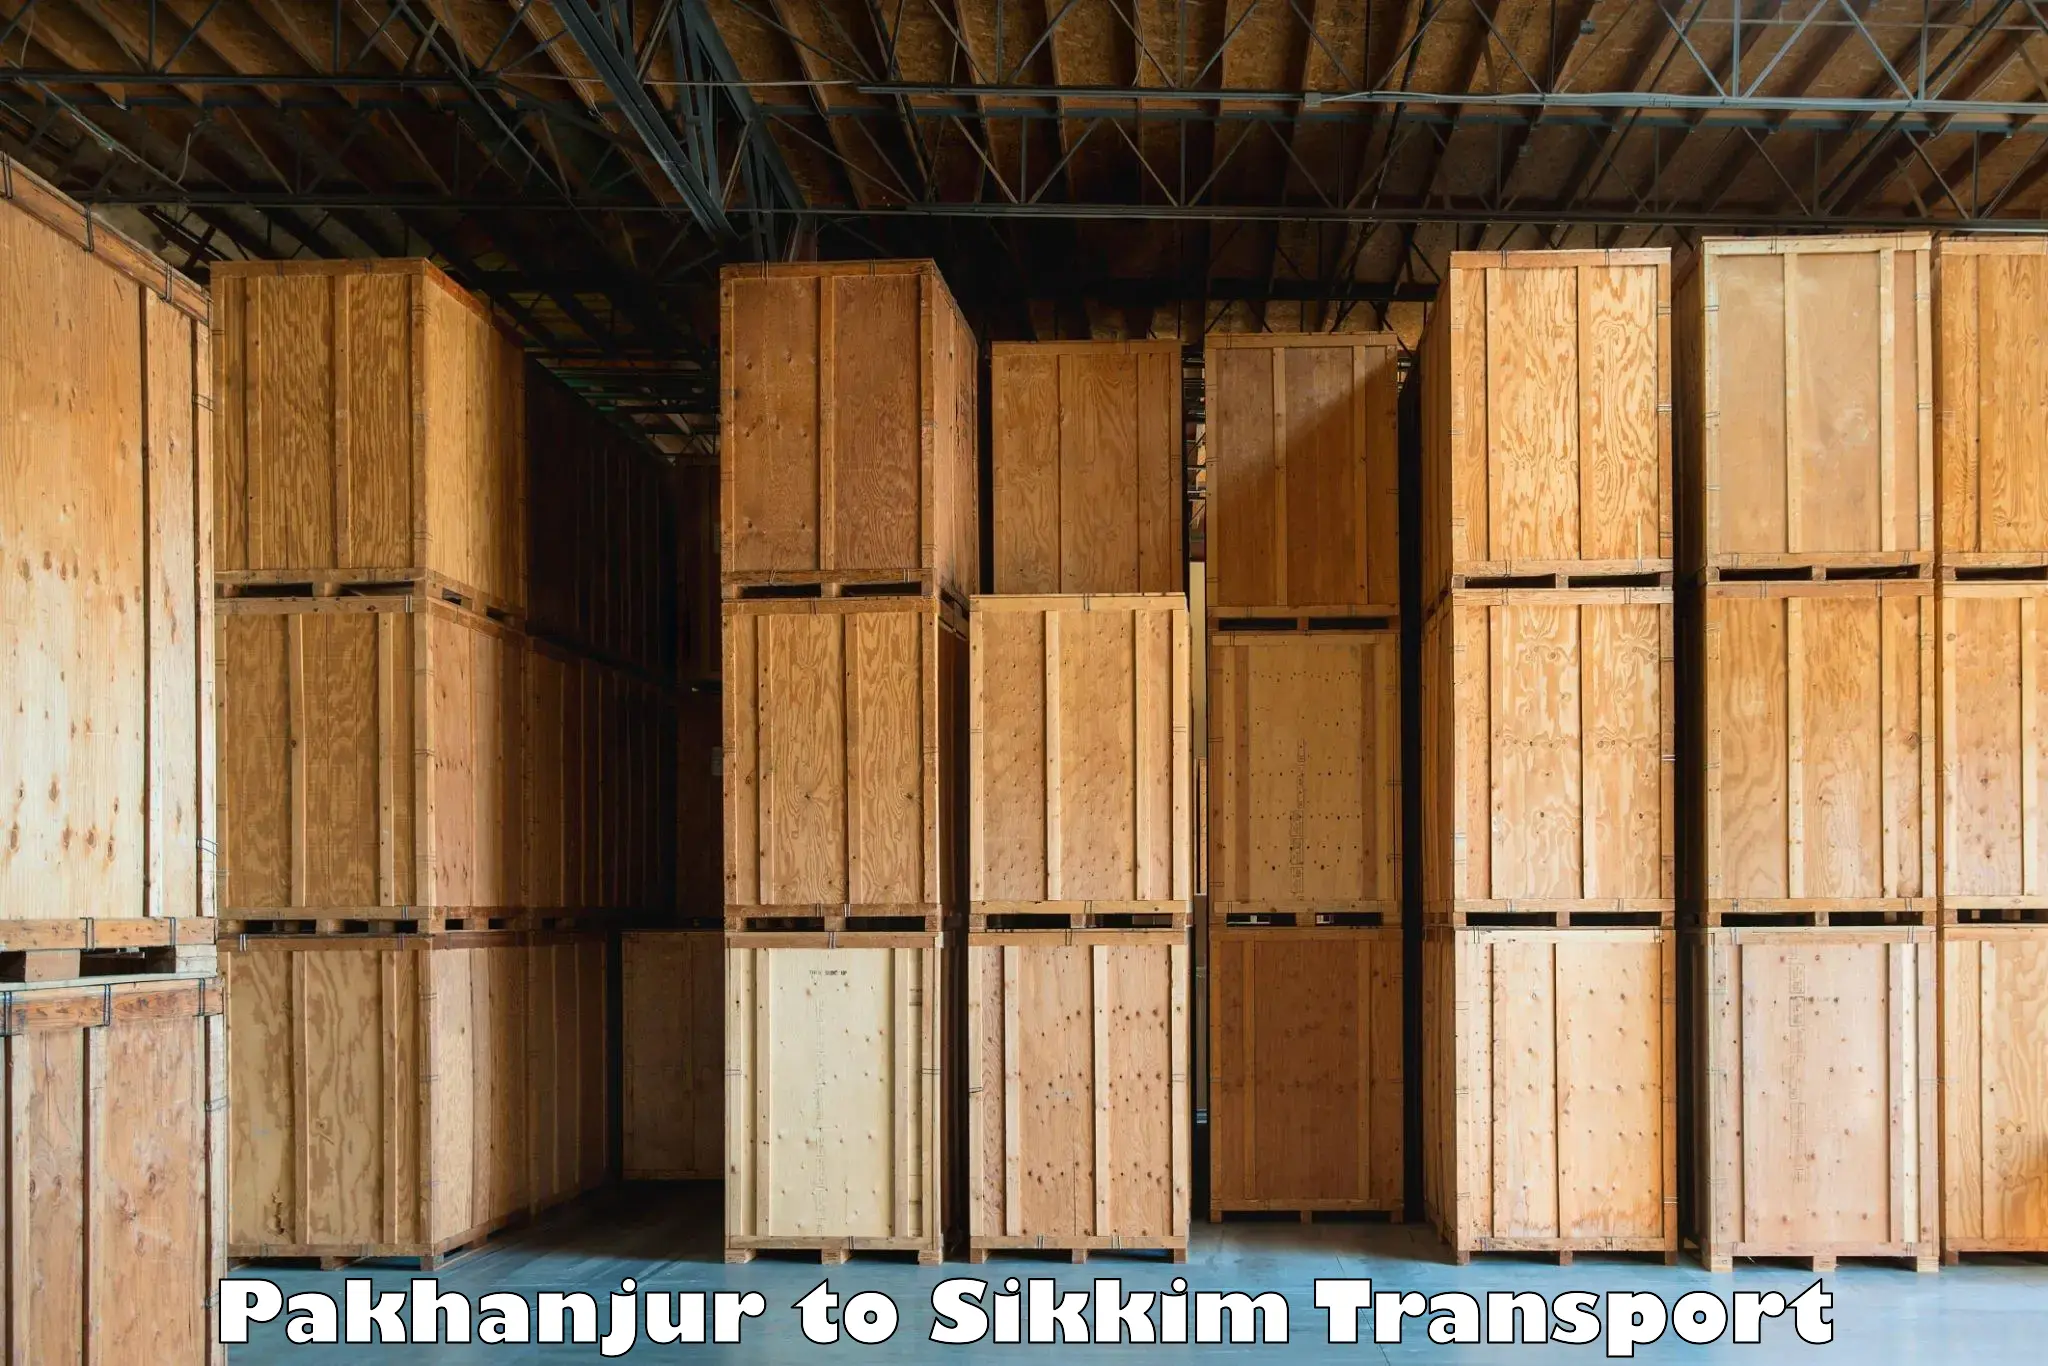 Daily transport service Pakhanjur to South Sikkim